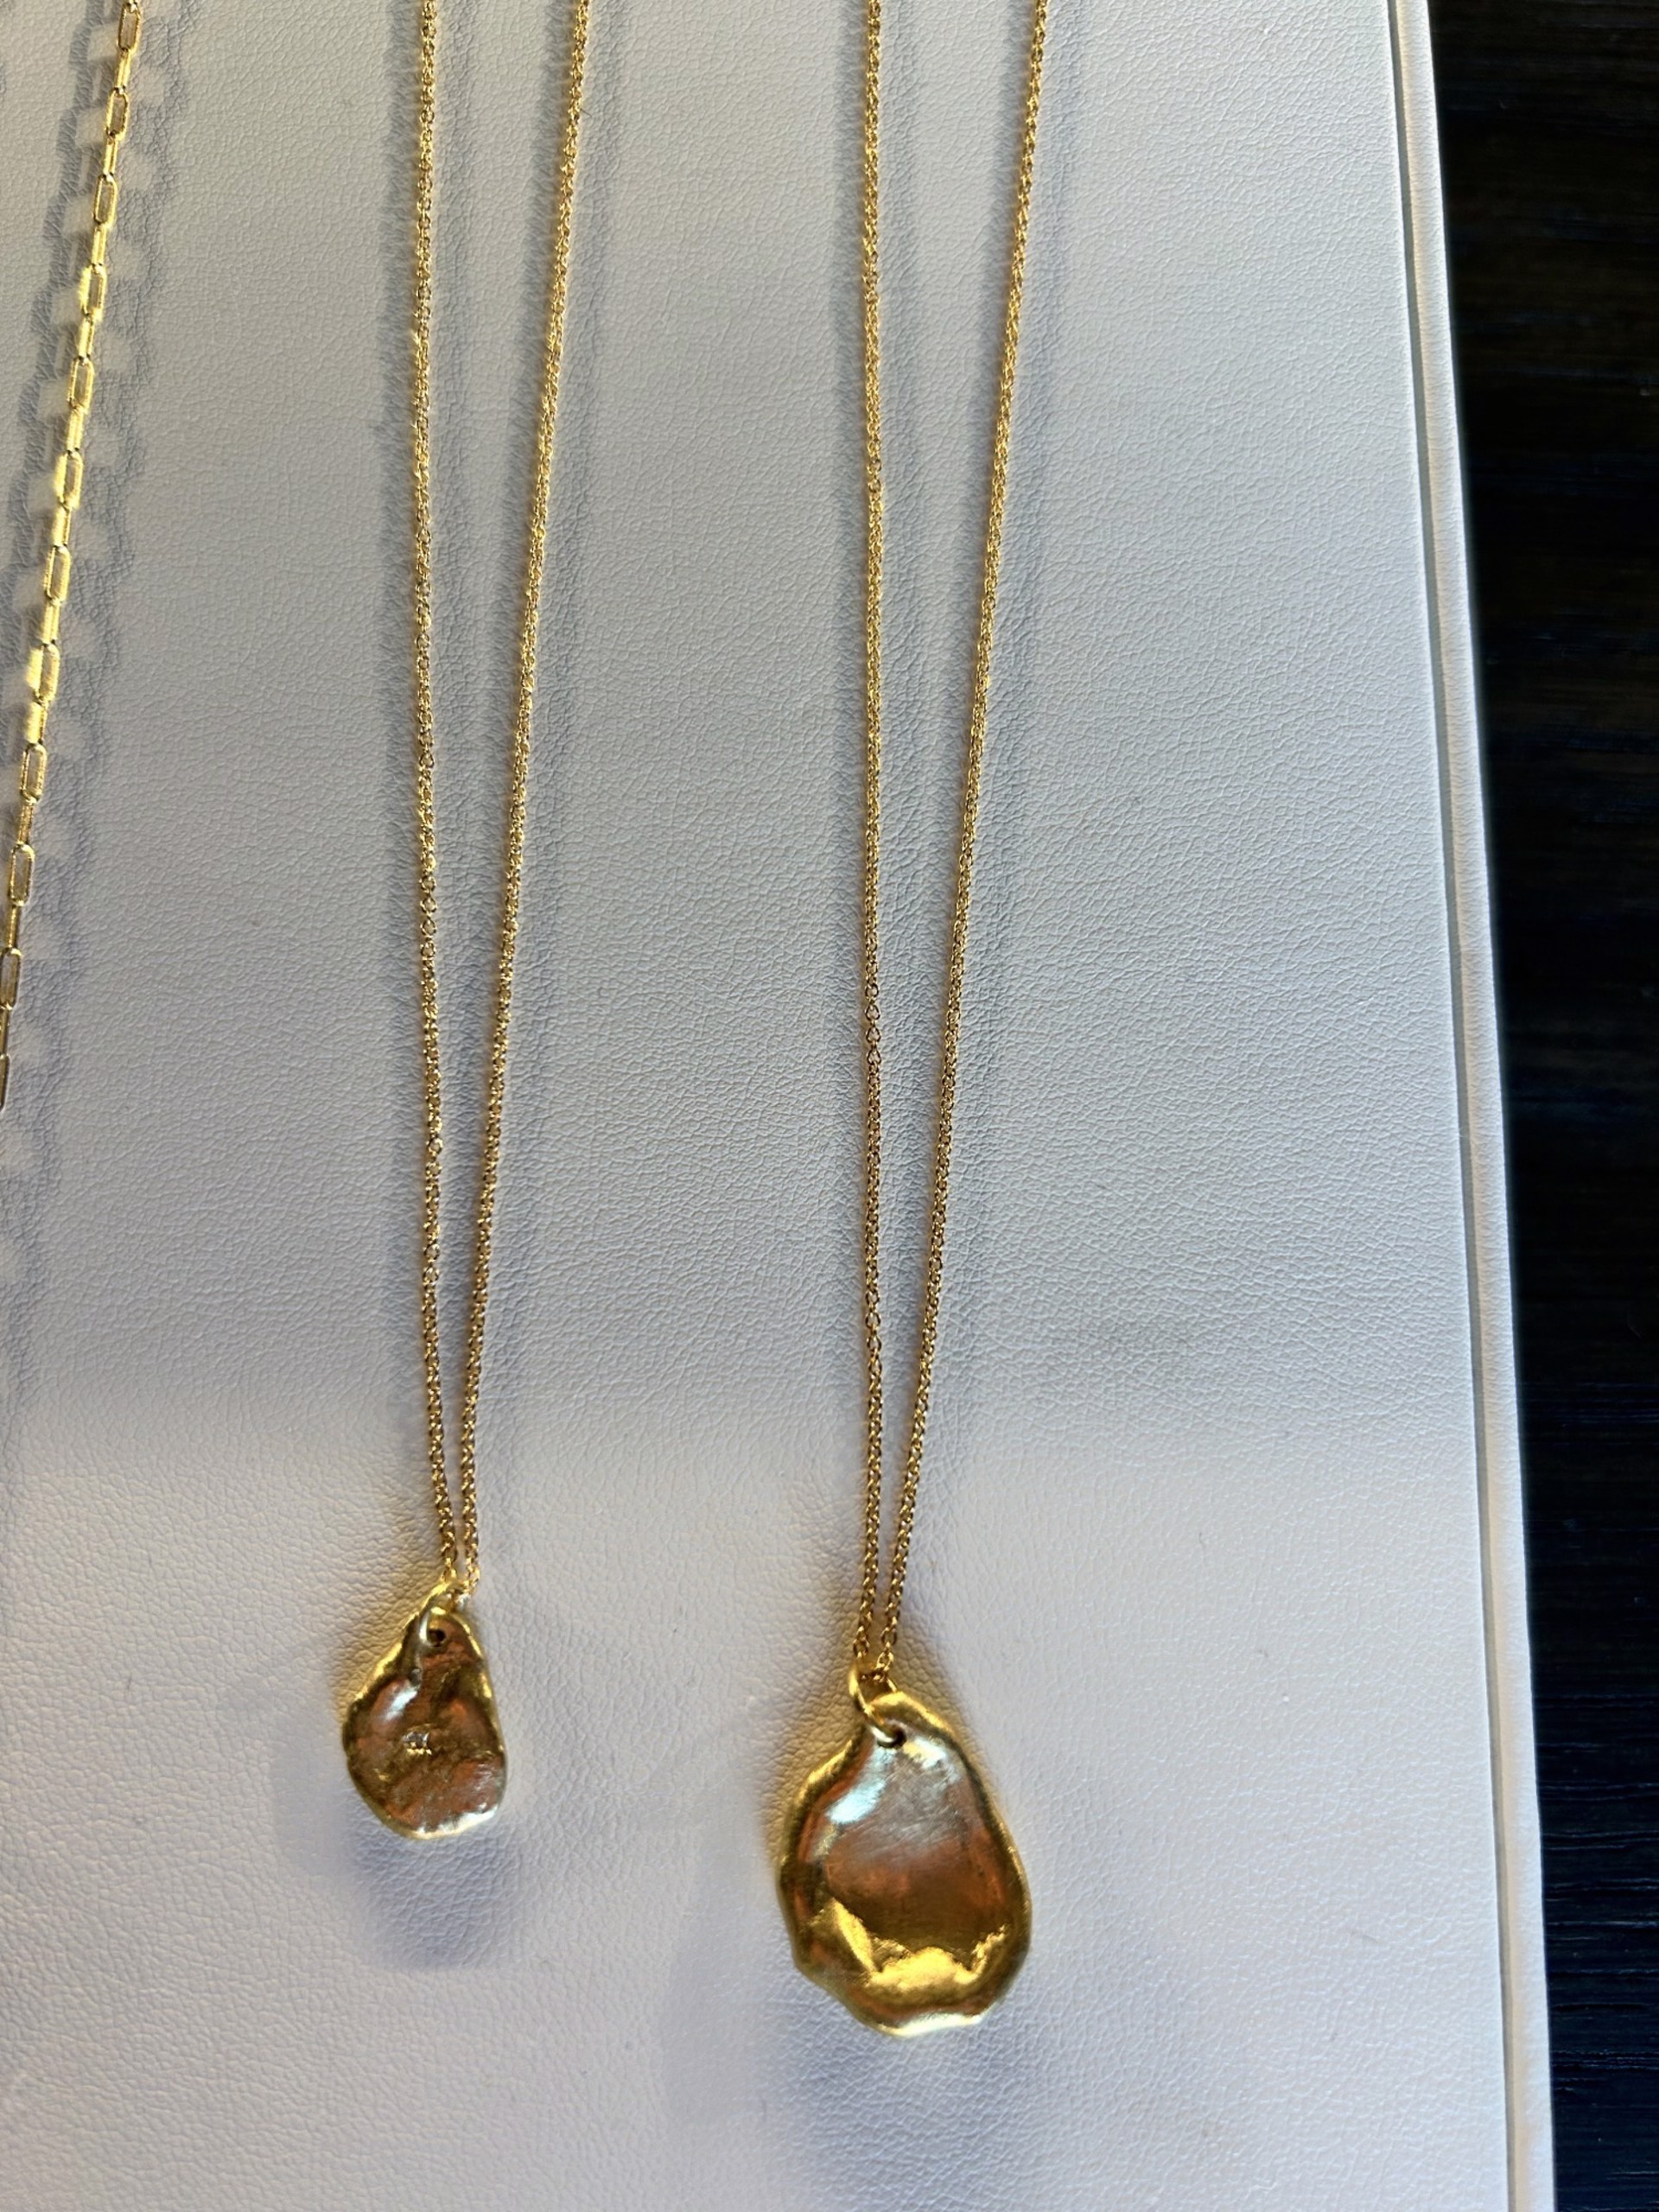 Delicate Chain and Gold Pendant by Leandra Hill